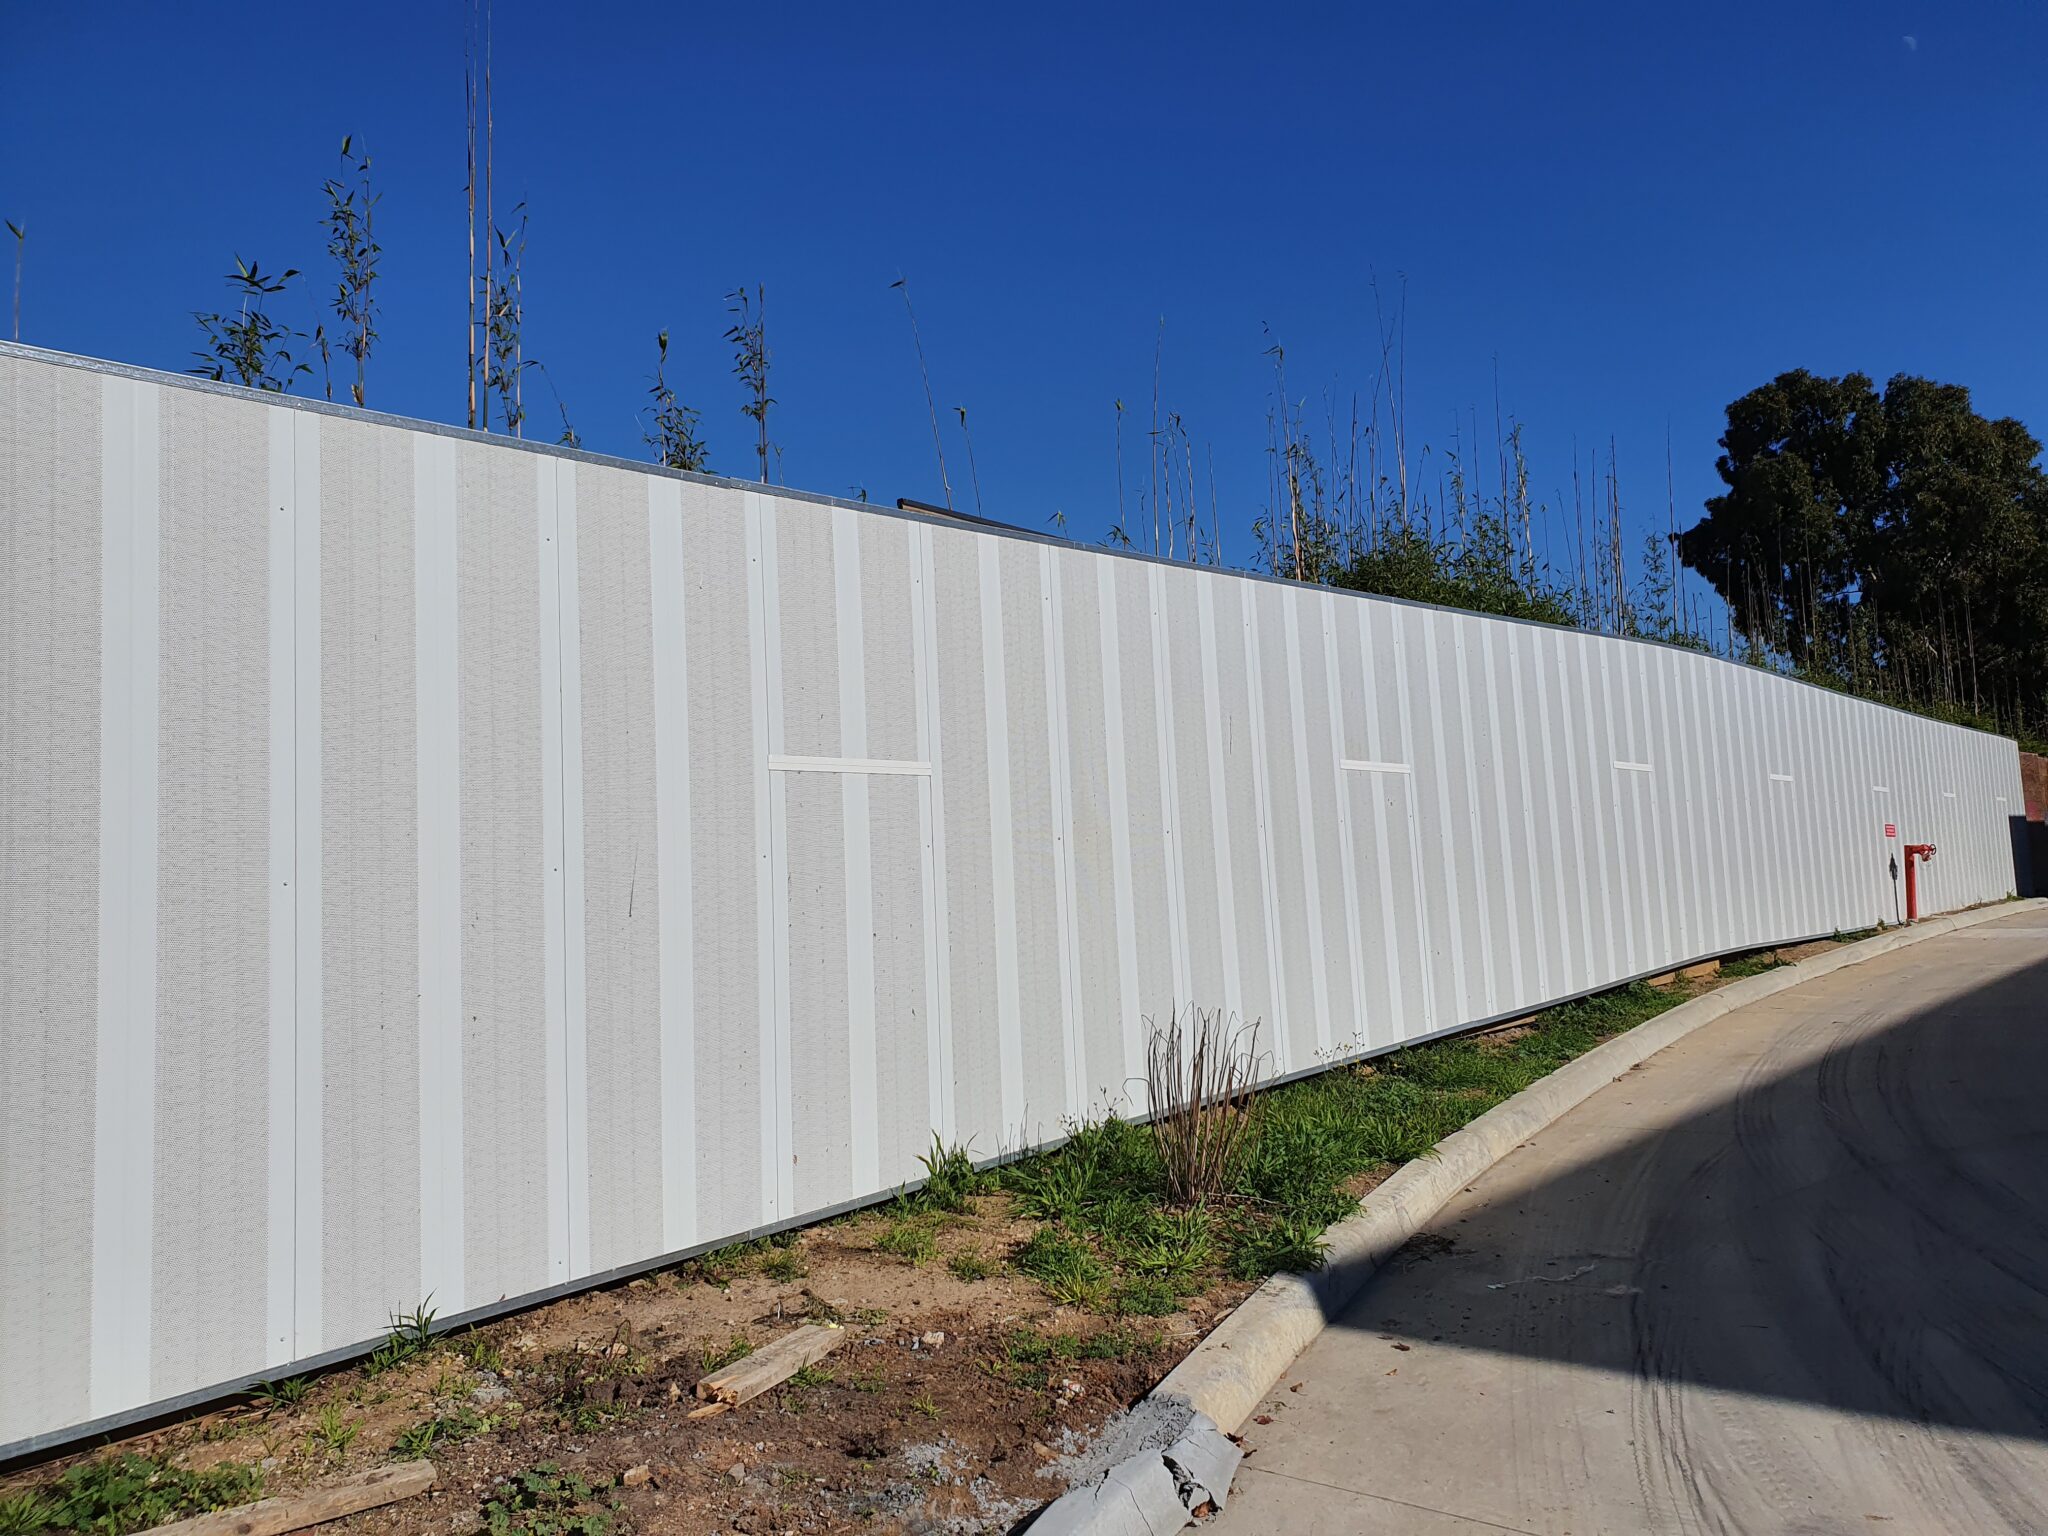 The Flexshield acoustic wall is a versatile and effective solution designed to mitigate noise and enhance acoustic performance in various environments.